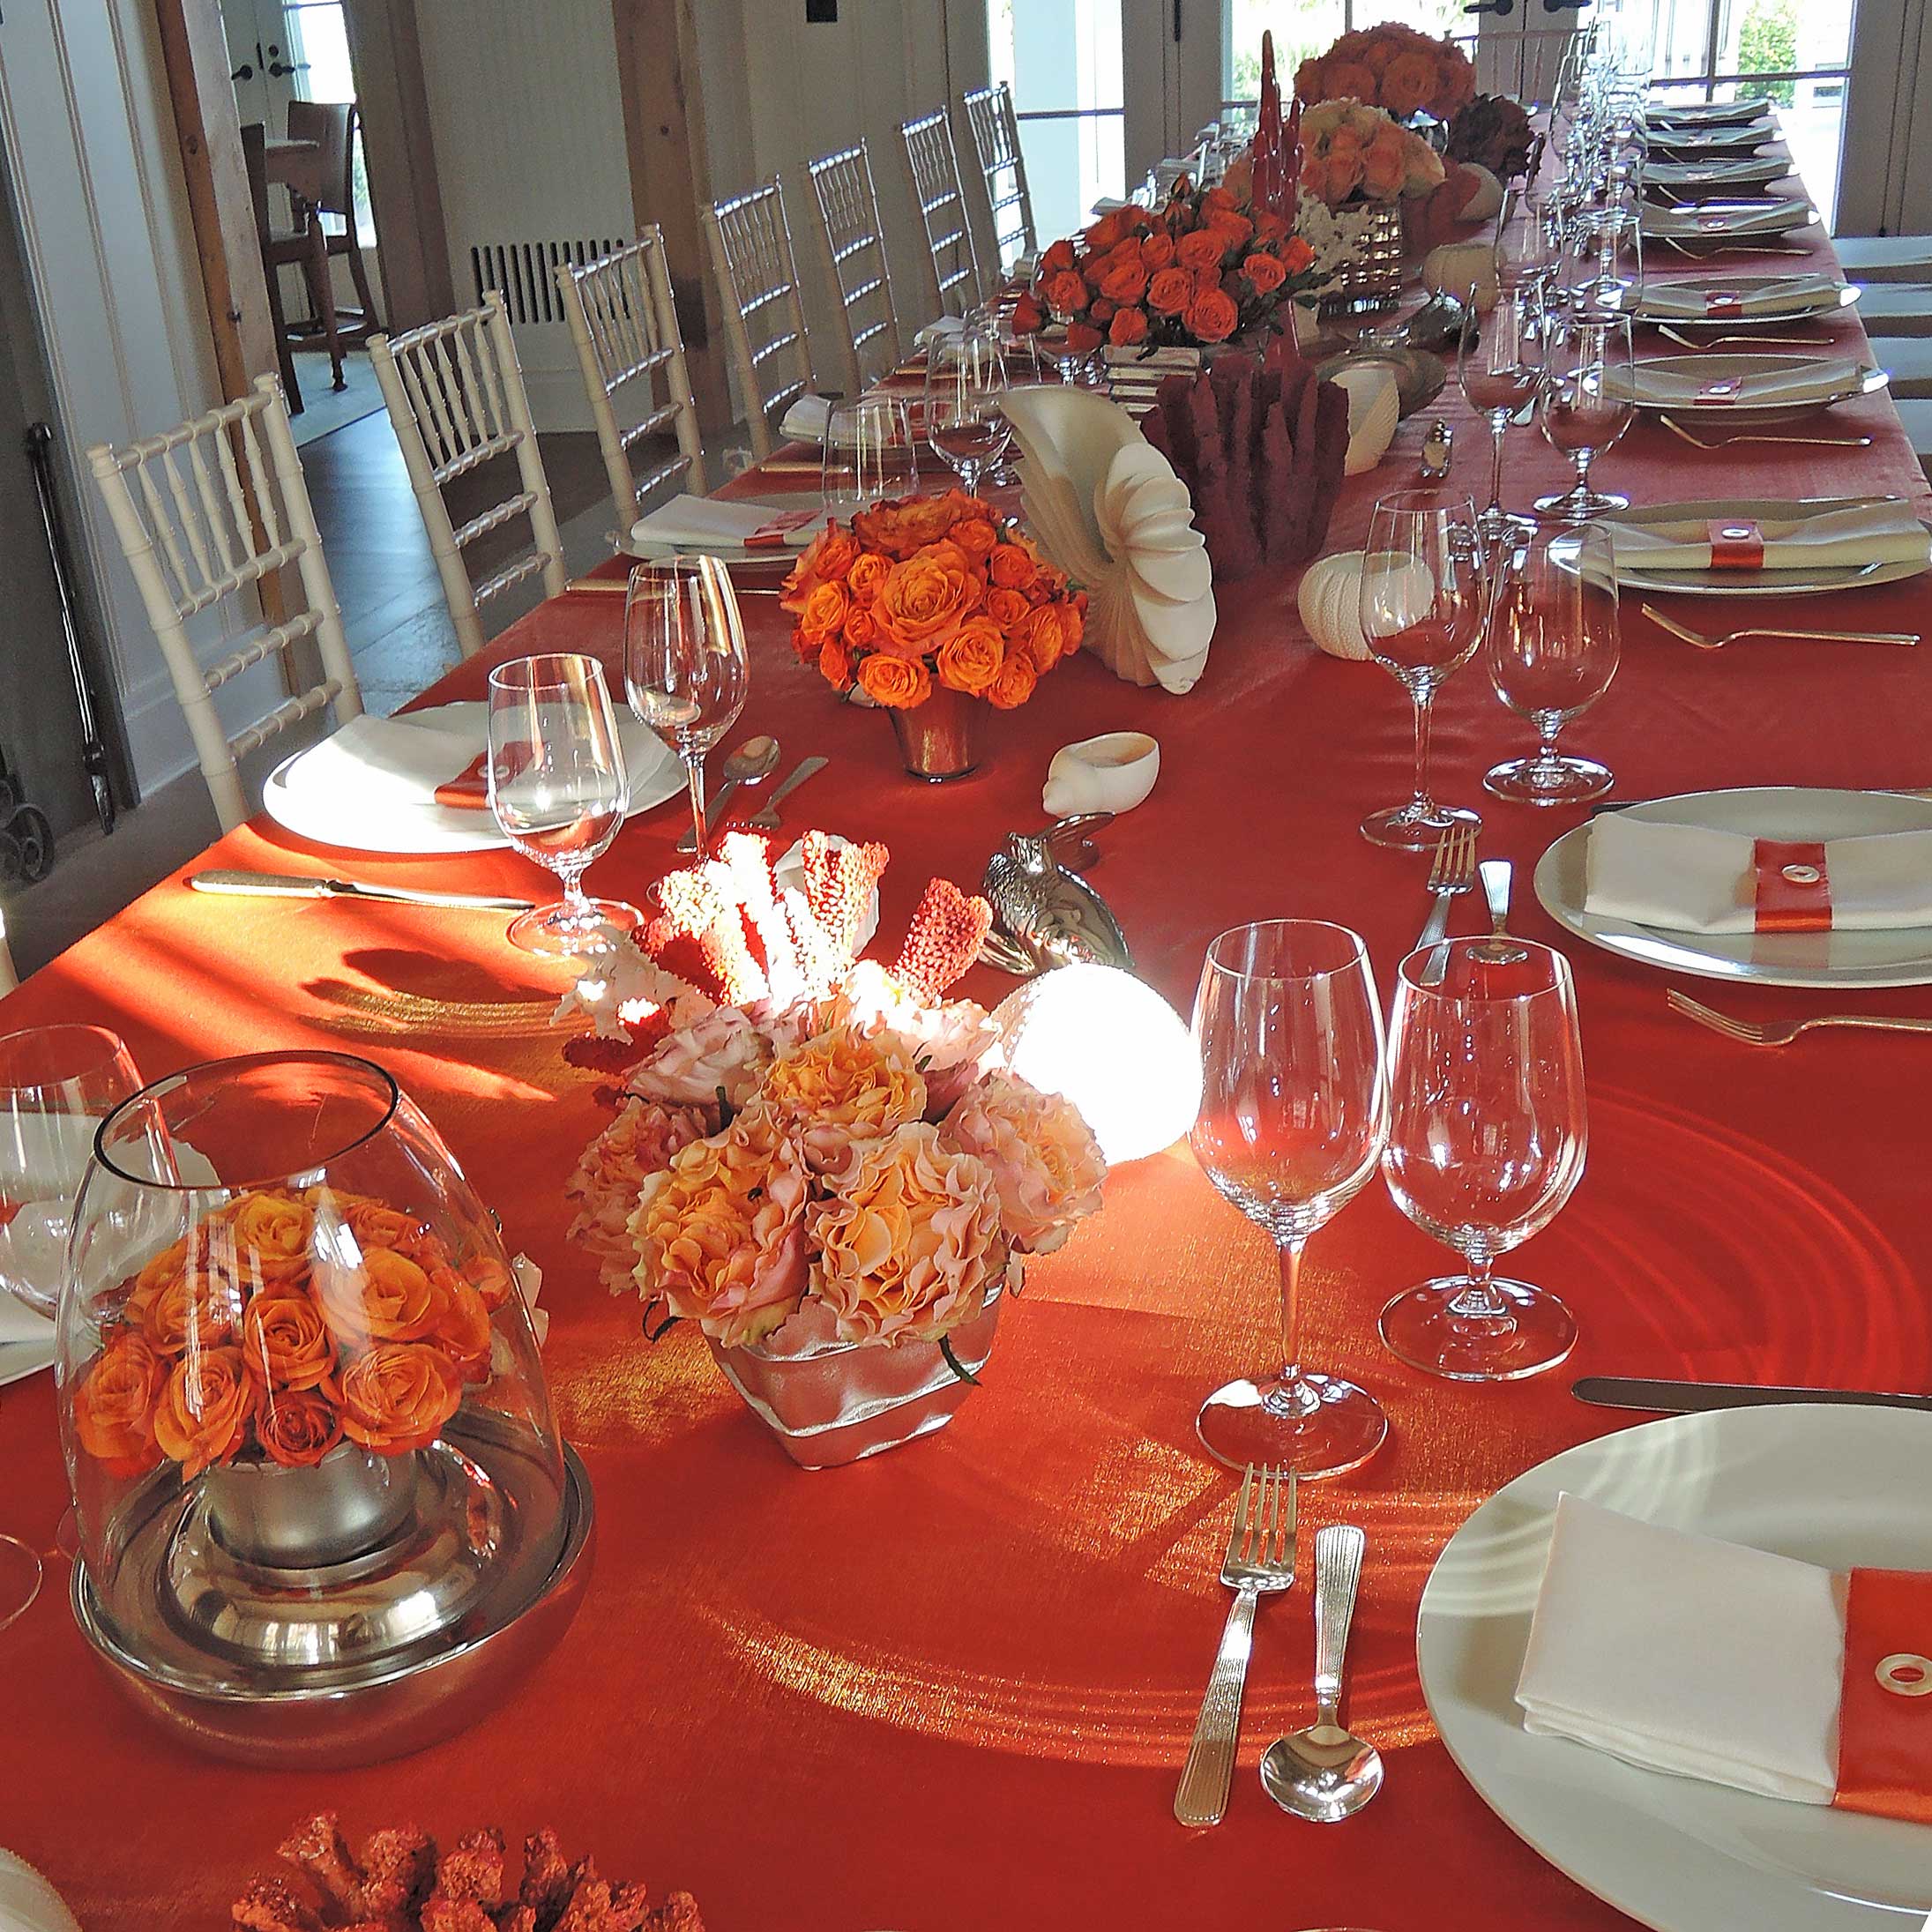  east hampton, ny, floral designer, florist, flower arrangement, coral, dinner party, home delivery, by appointment,hamptons, new york city, manhattan 